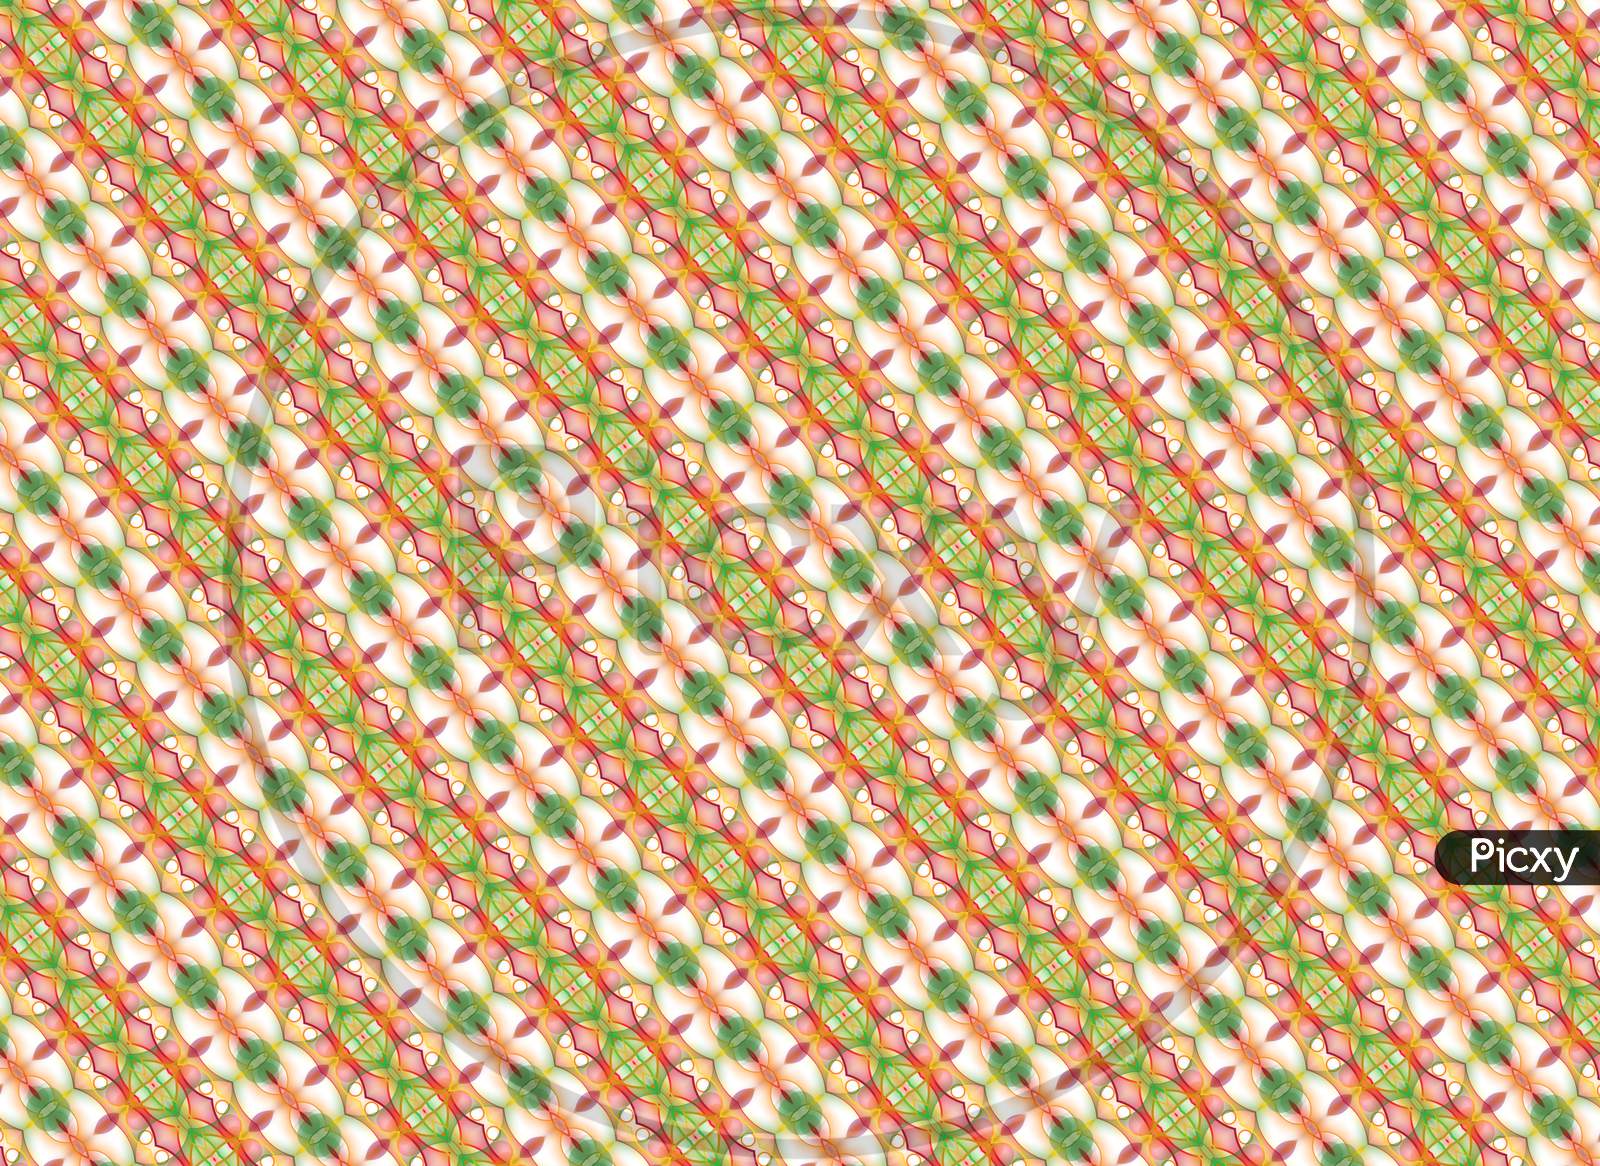 Tile and fabric pattern design.